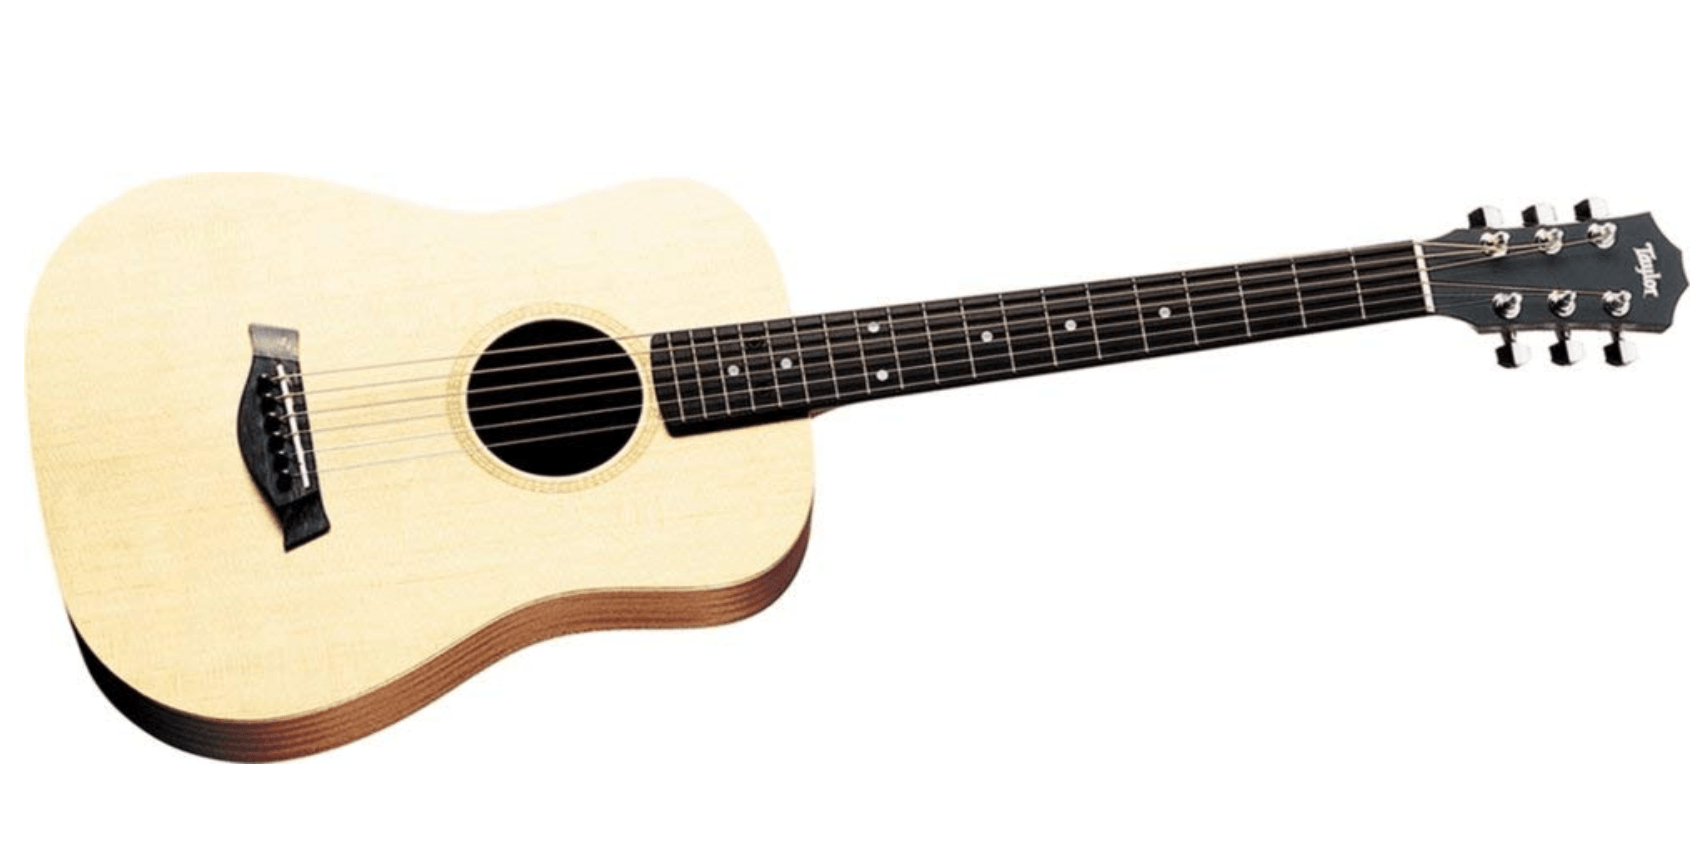 Baby Taylor BT-1 - the second best travel acoustic guitar